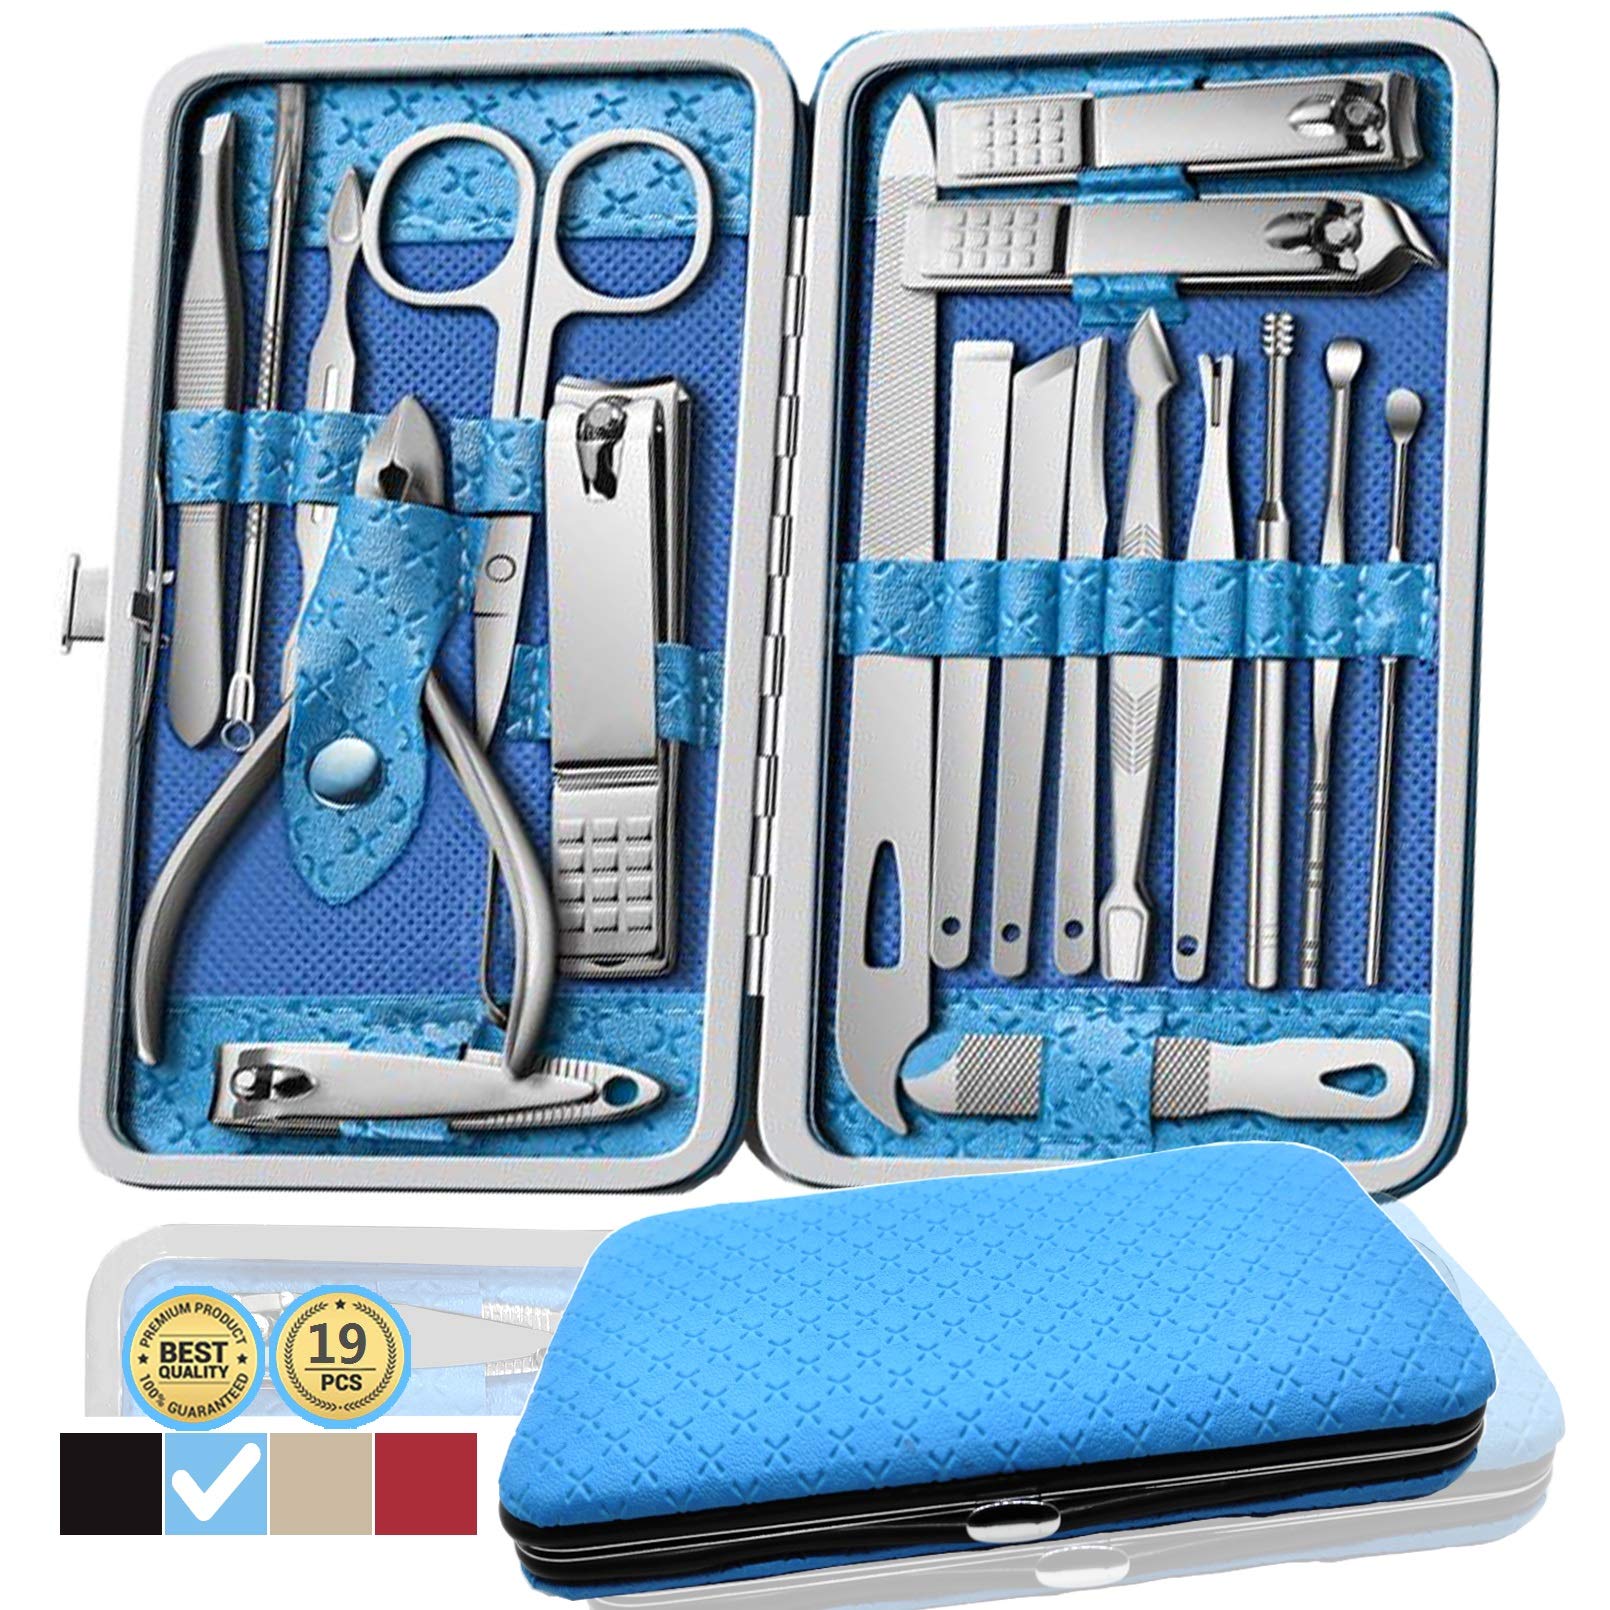 Manicure Set Travel Mini Nail Clippers Kit Pedicure Care Tools 10Pcs  Stainless Steel Grooming kit Coffee Grid 